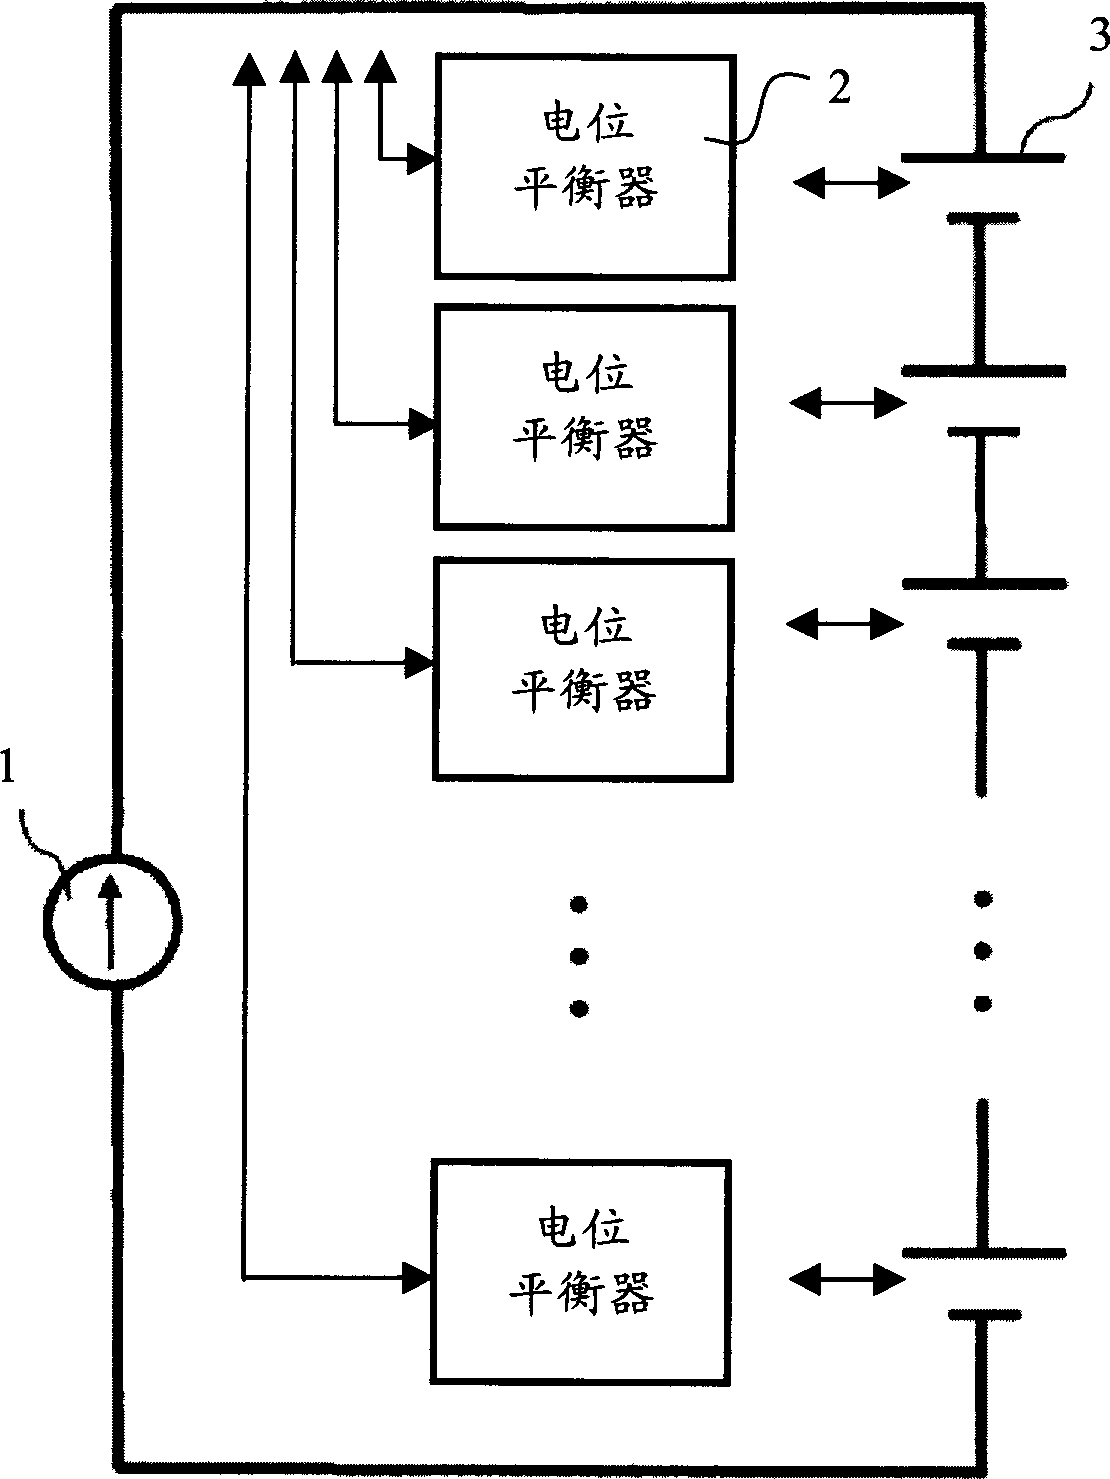 Staged cell potential balancing apparatus